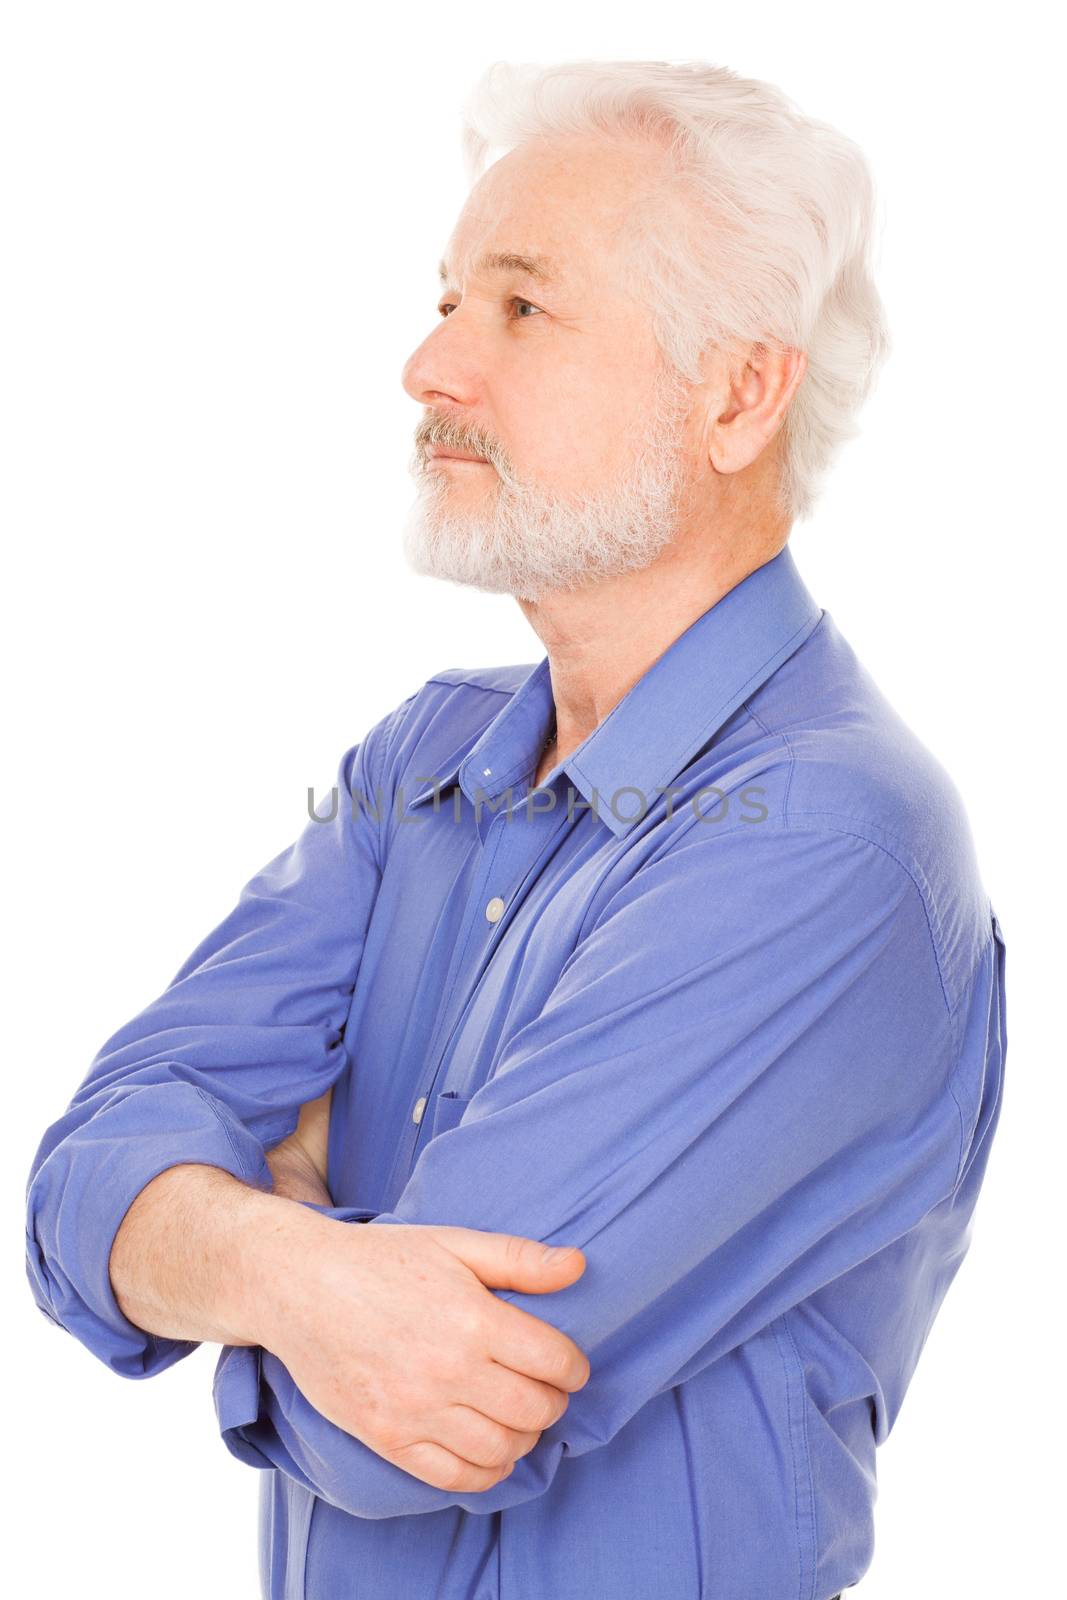 Portrait of handsome elderly man with beard on a white background